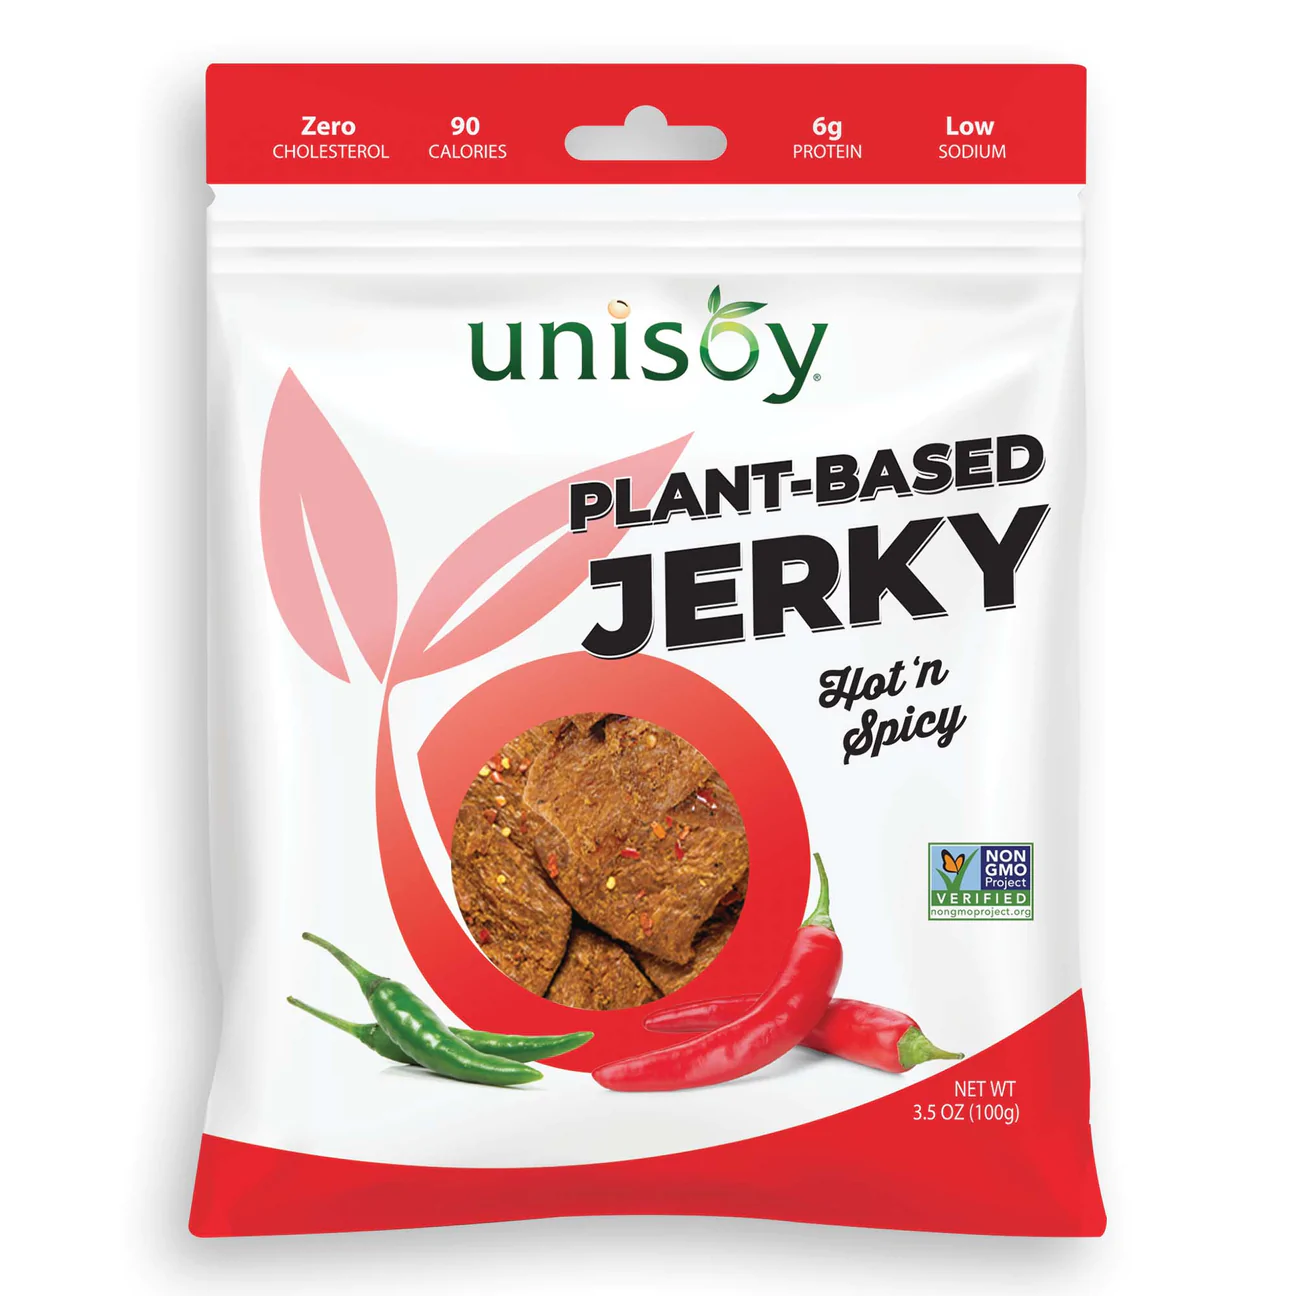 Unisoy Plant-based Jerky - Hot n' Spicy 2 innerpacks per case 3.5 oz